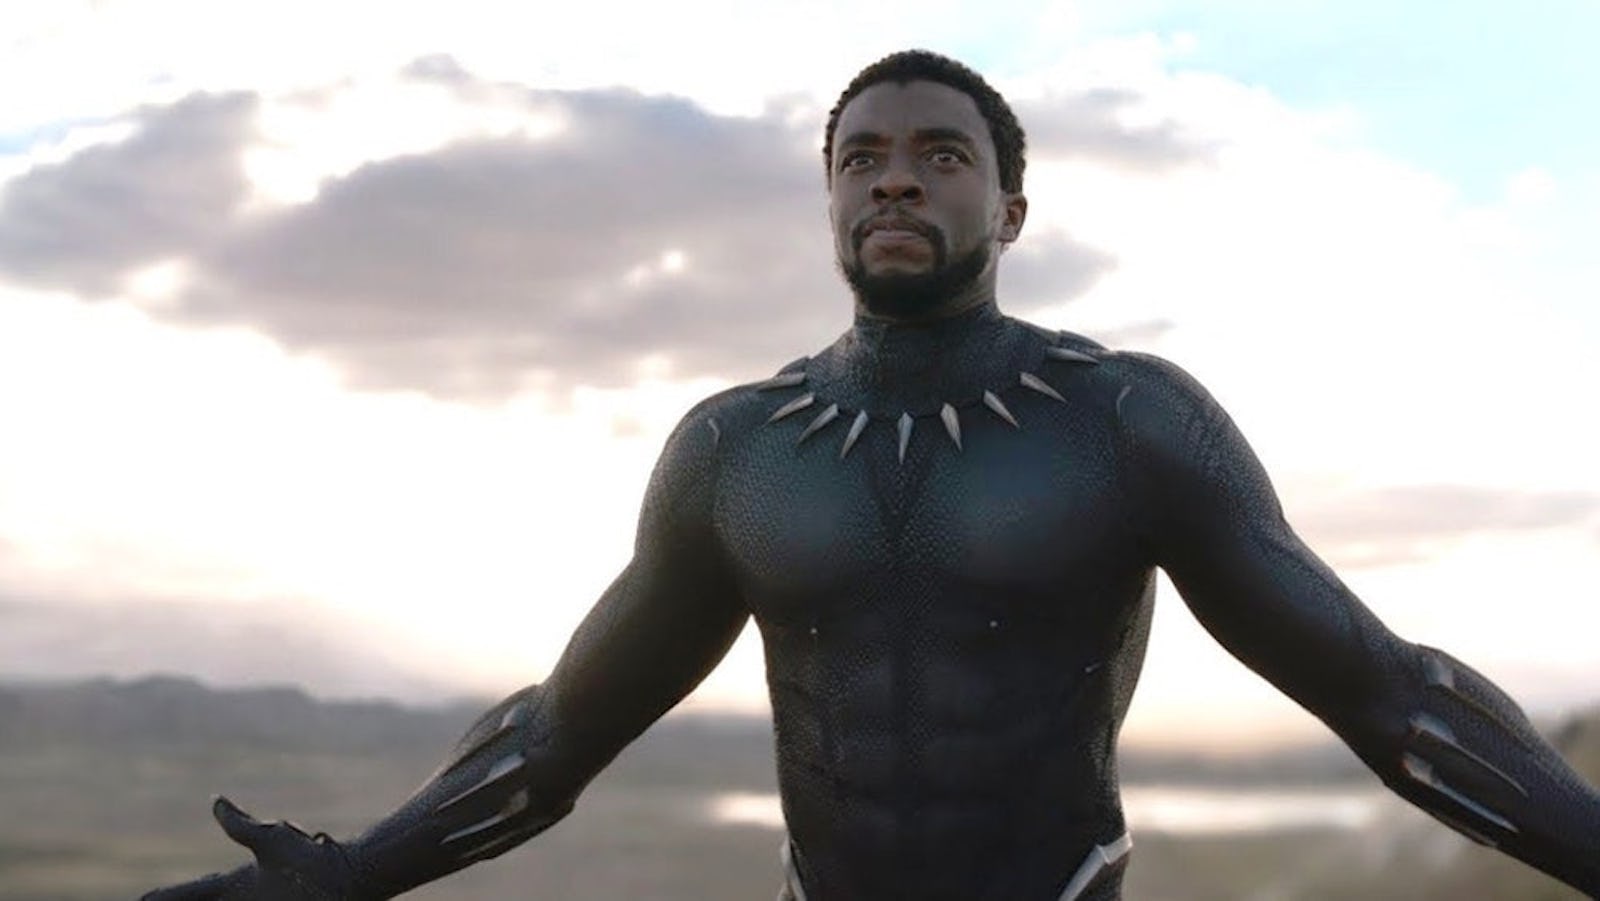 When Will 'Black Panther 2' Be Released? Fans Could See T'Challa's